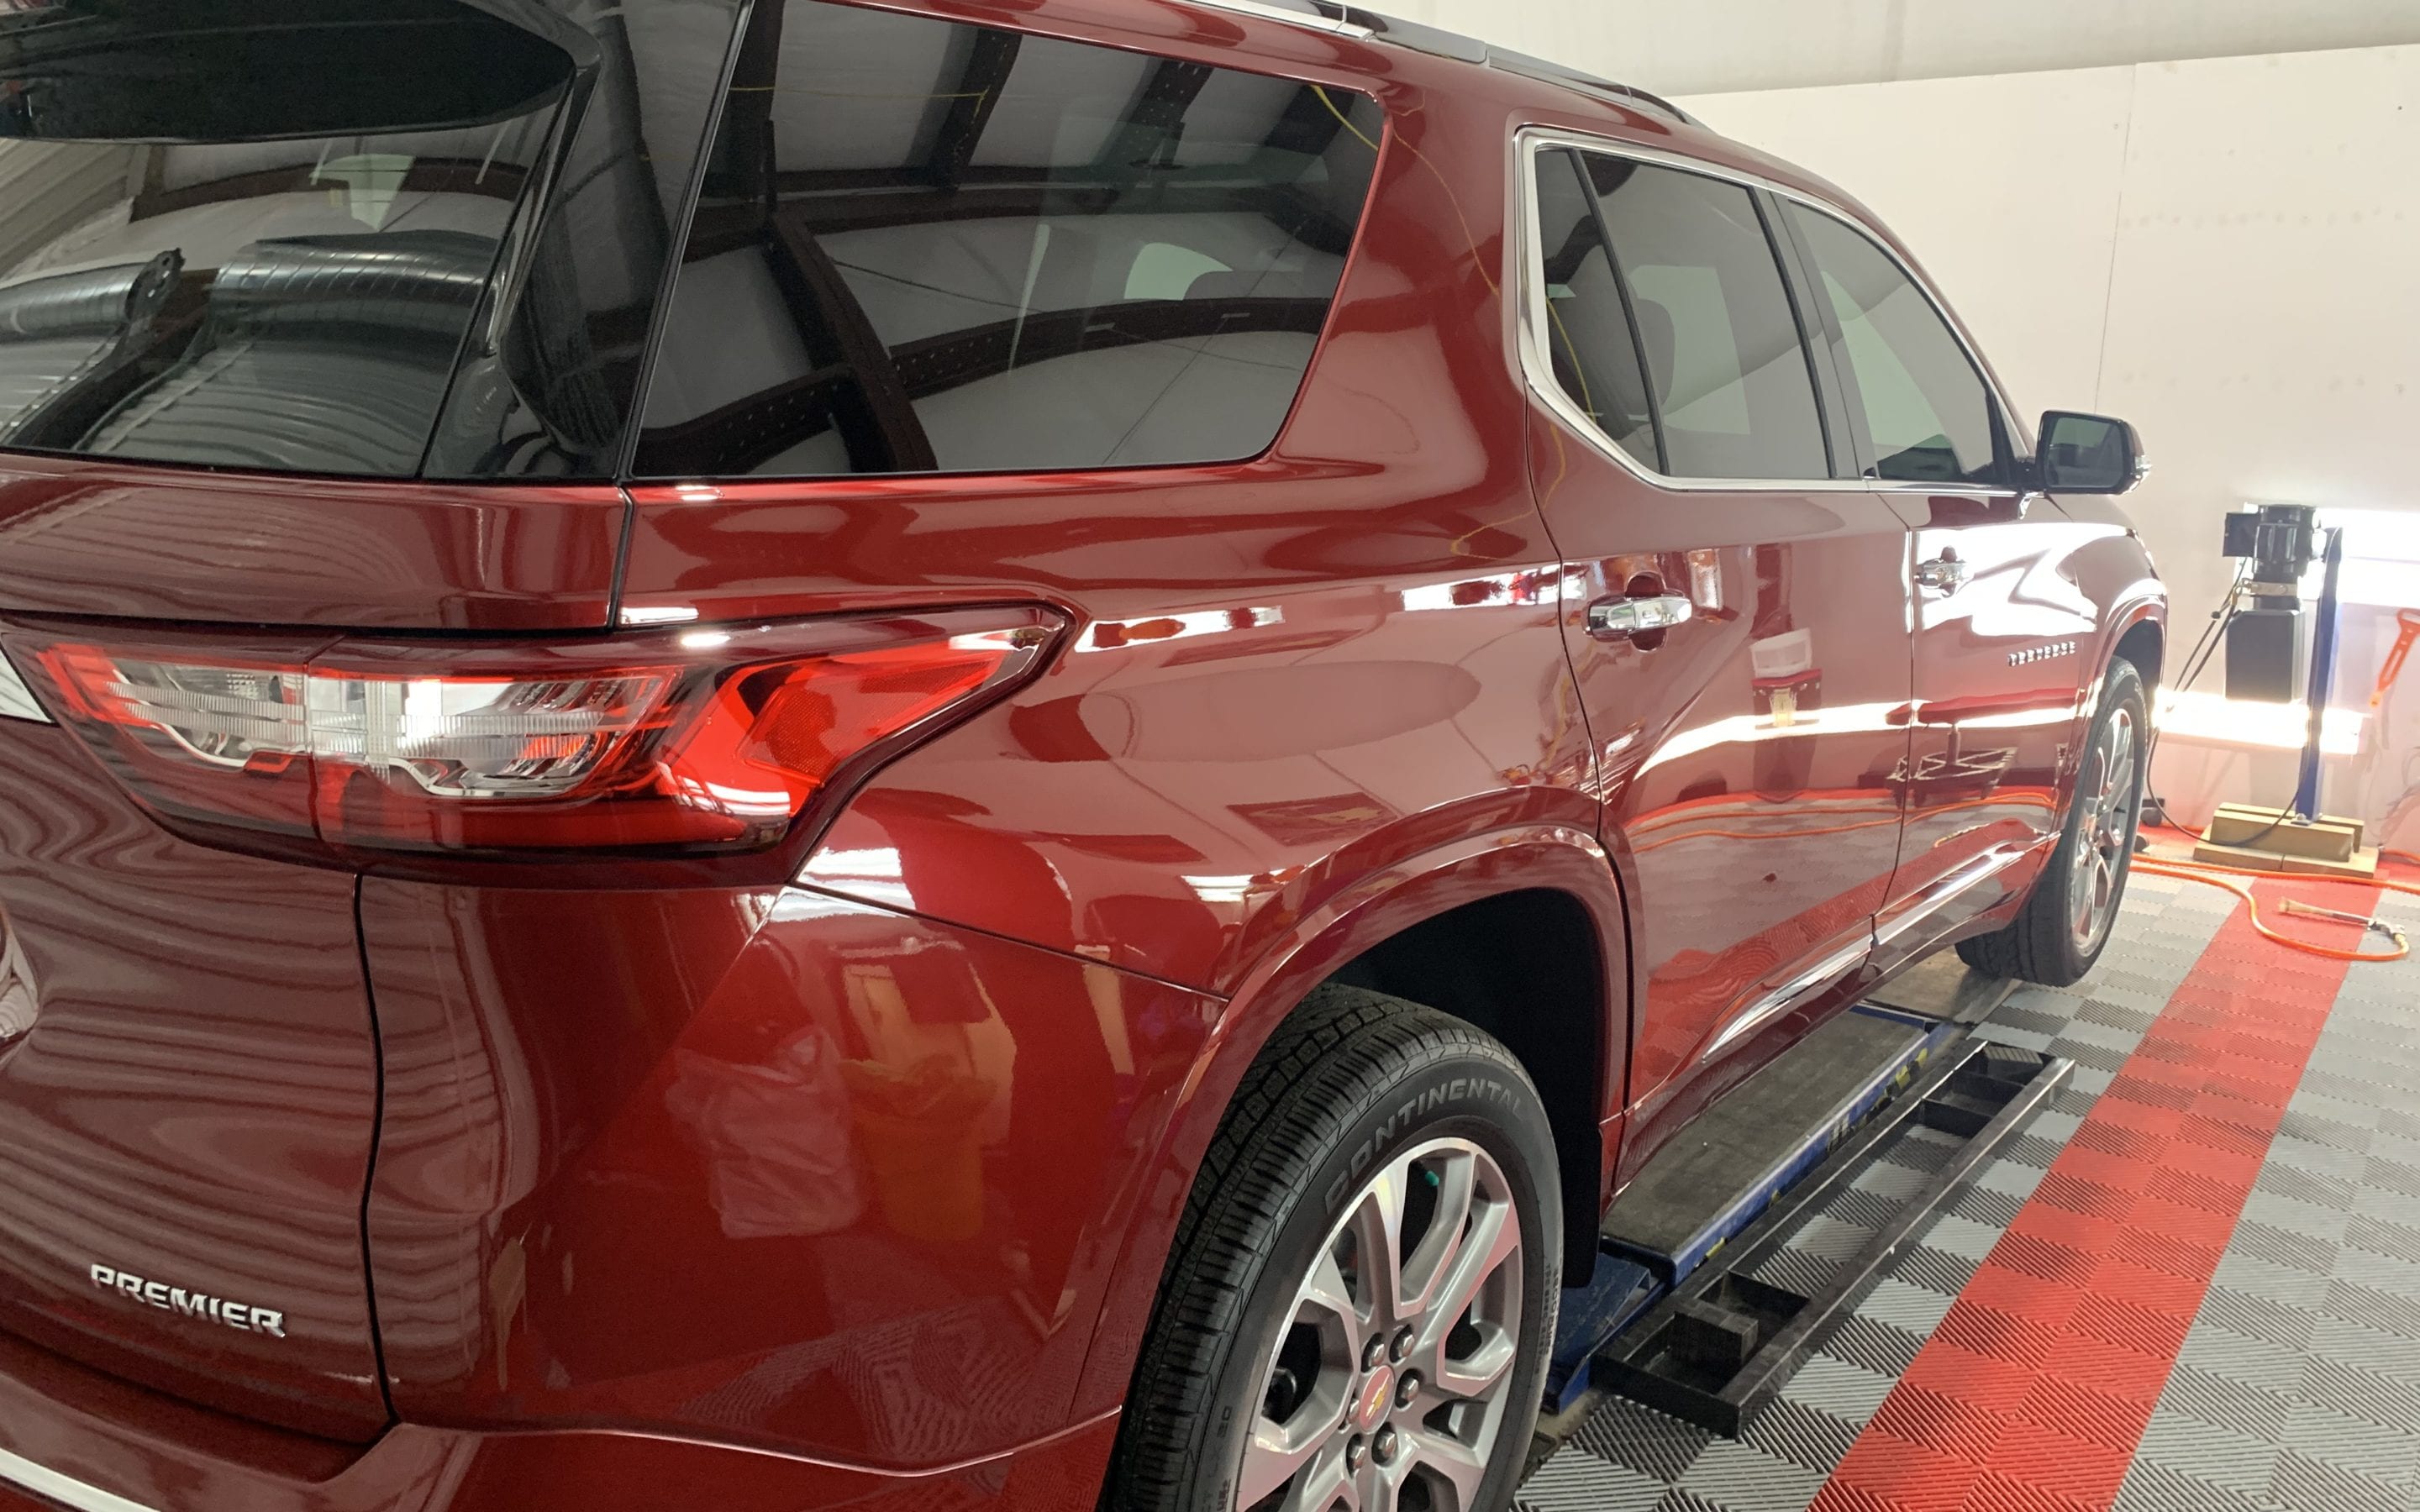 Photo of a New Car Preparation of a 2020 Chevrolet Traverse